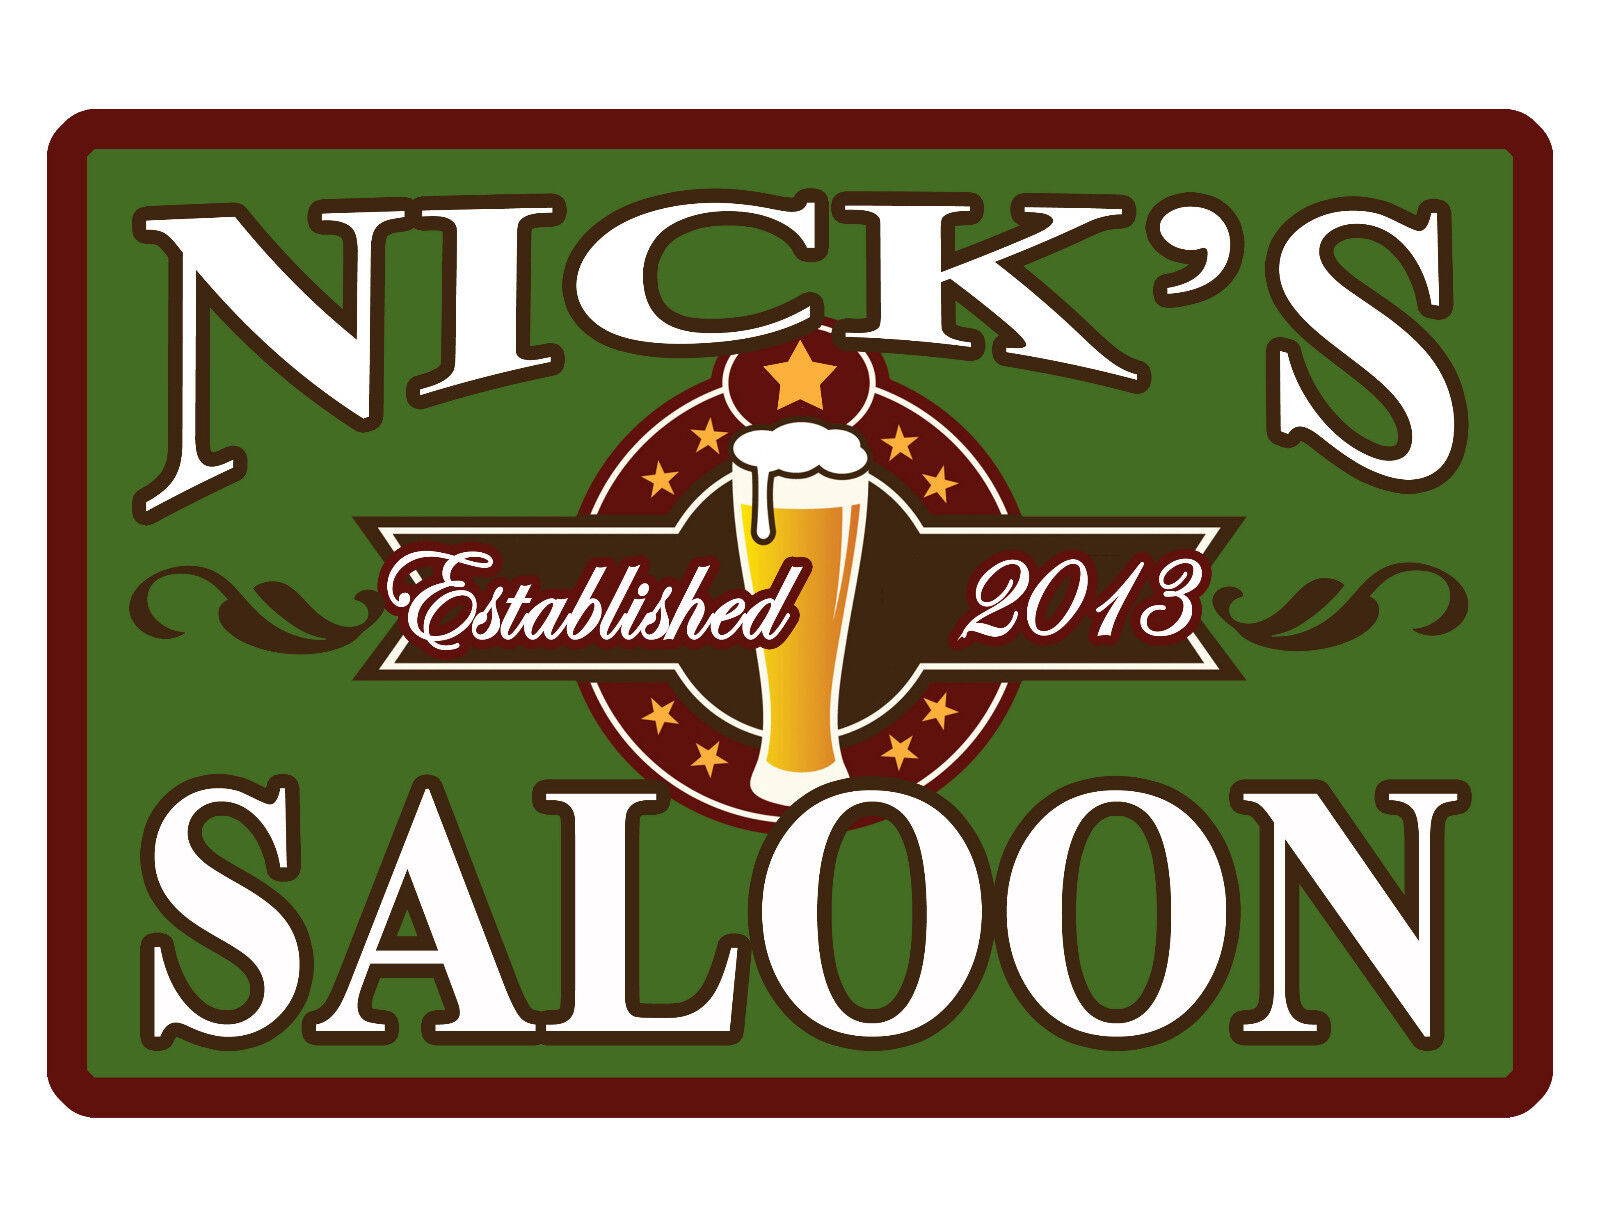 PERSONALIZED SALOON SIGN YOUR NAME CUSTOM DURABLE ALUMINUM FULL COLOR 12X18 #352